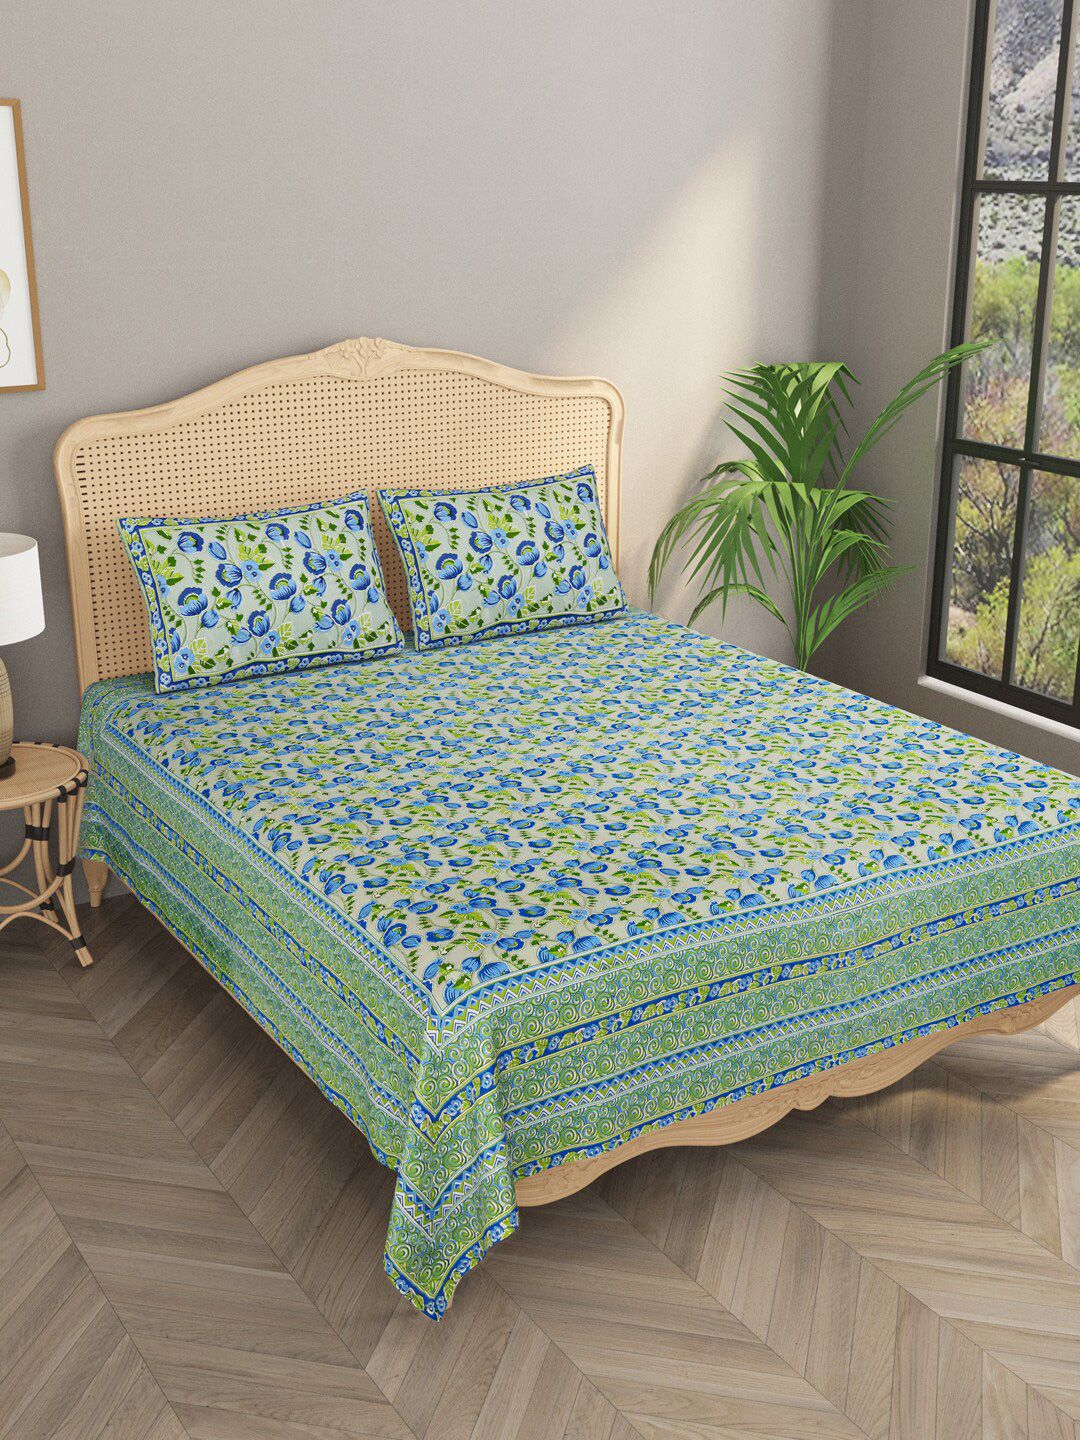 Gulaab Jaipur Green & Blue Ethnic Motifs 600 TC King Bedsheet with 2 Pillow Covers Price in India